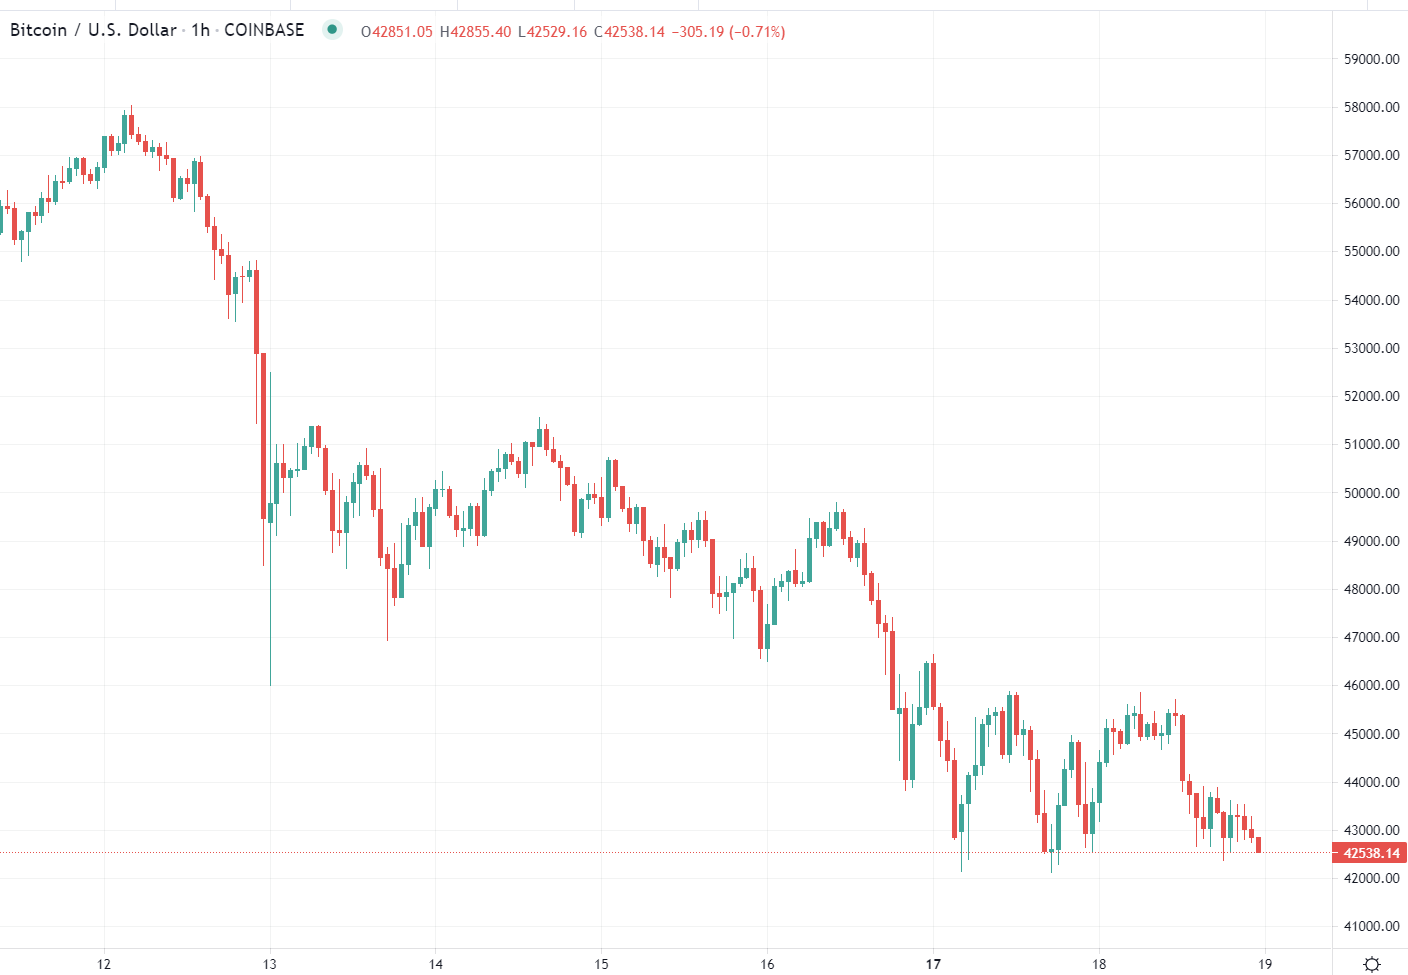 The chart is looking heavy for BTC 